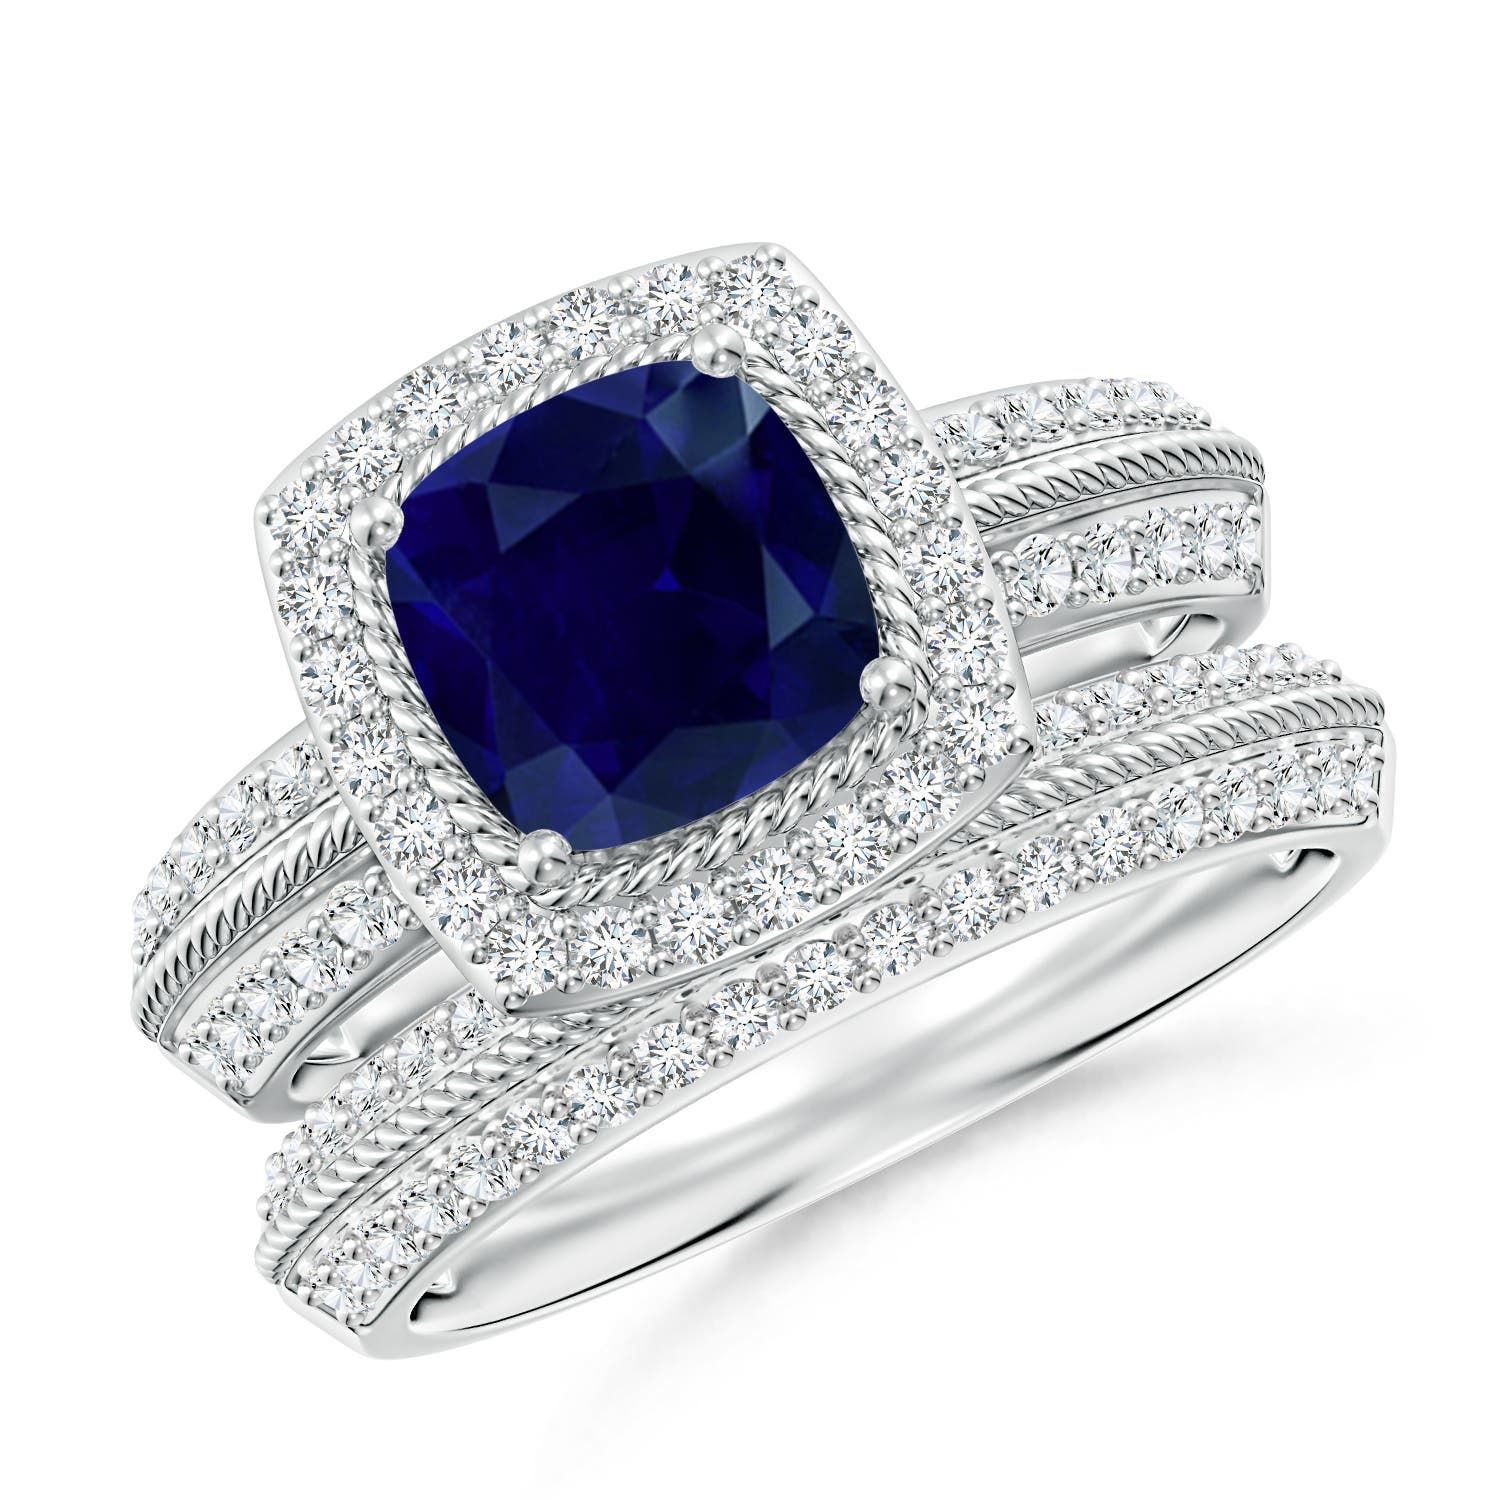 AA - Blue Sapphire / 2.42 CT / 14 KT White Gold